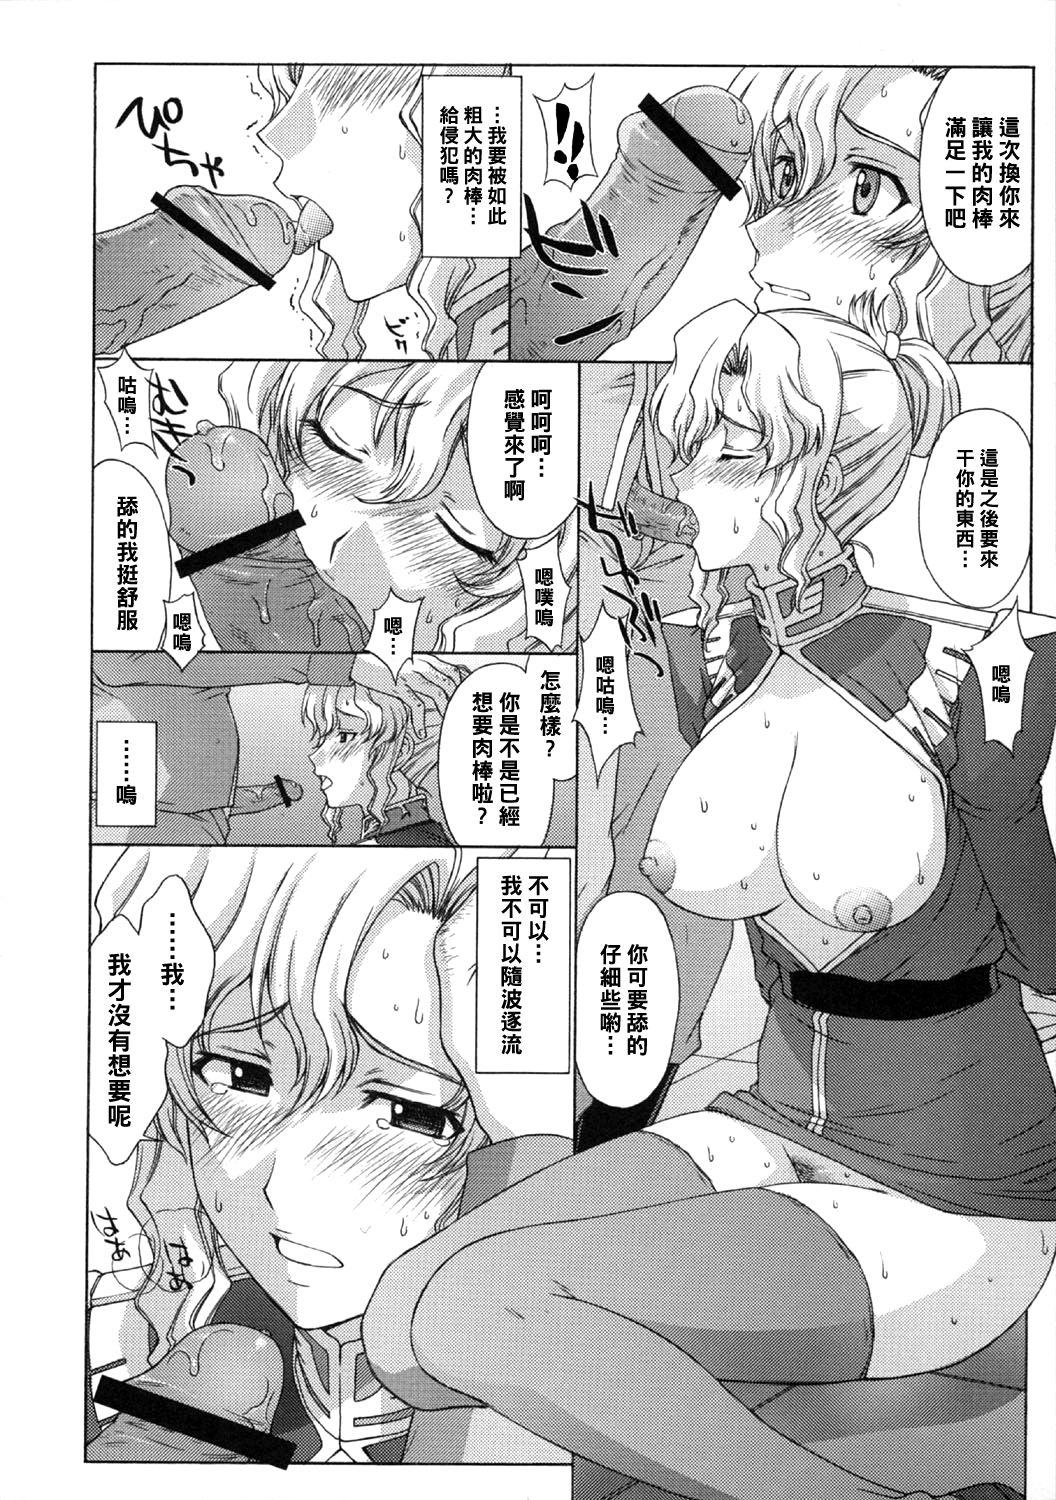 Bwc ZEON Lost War Chronicles Hishokan Hen - Mobile suit gundam lost war chronicles Cum Inside - Page 5